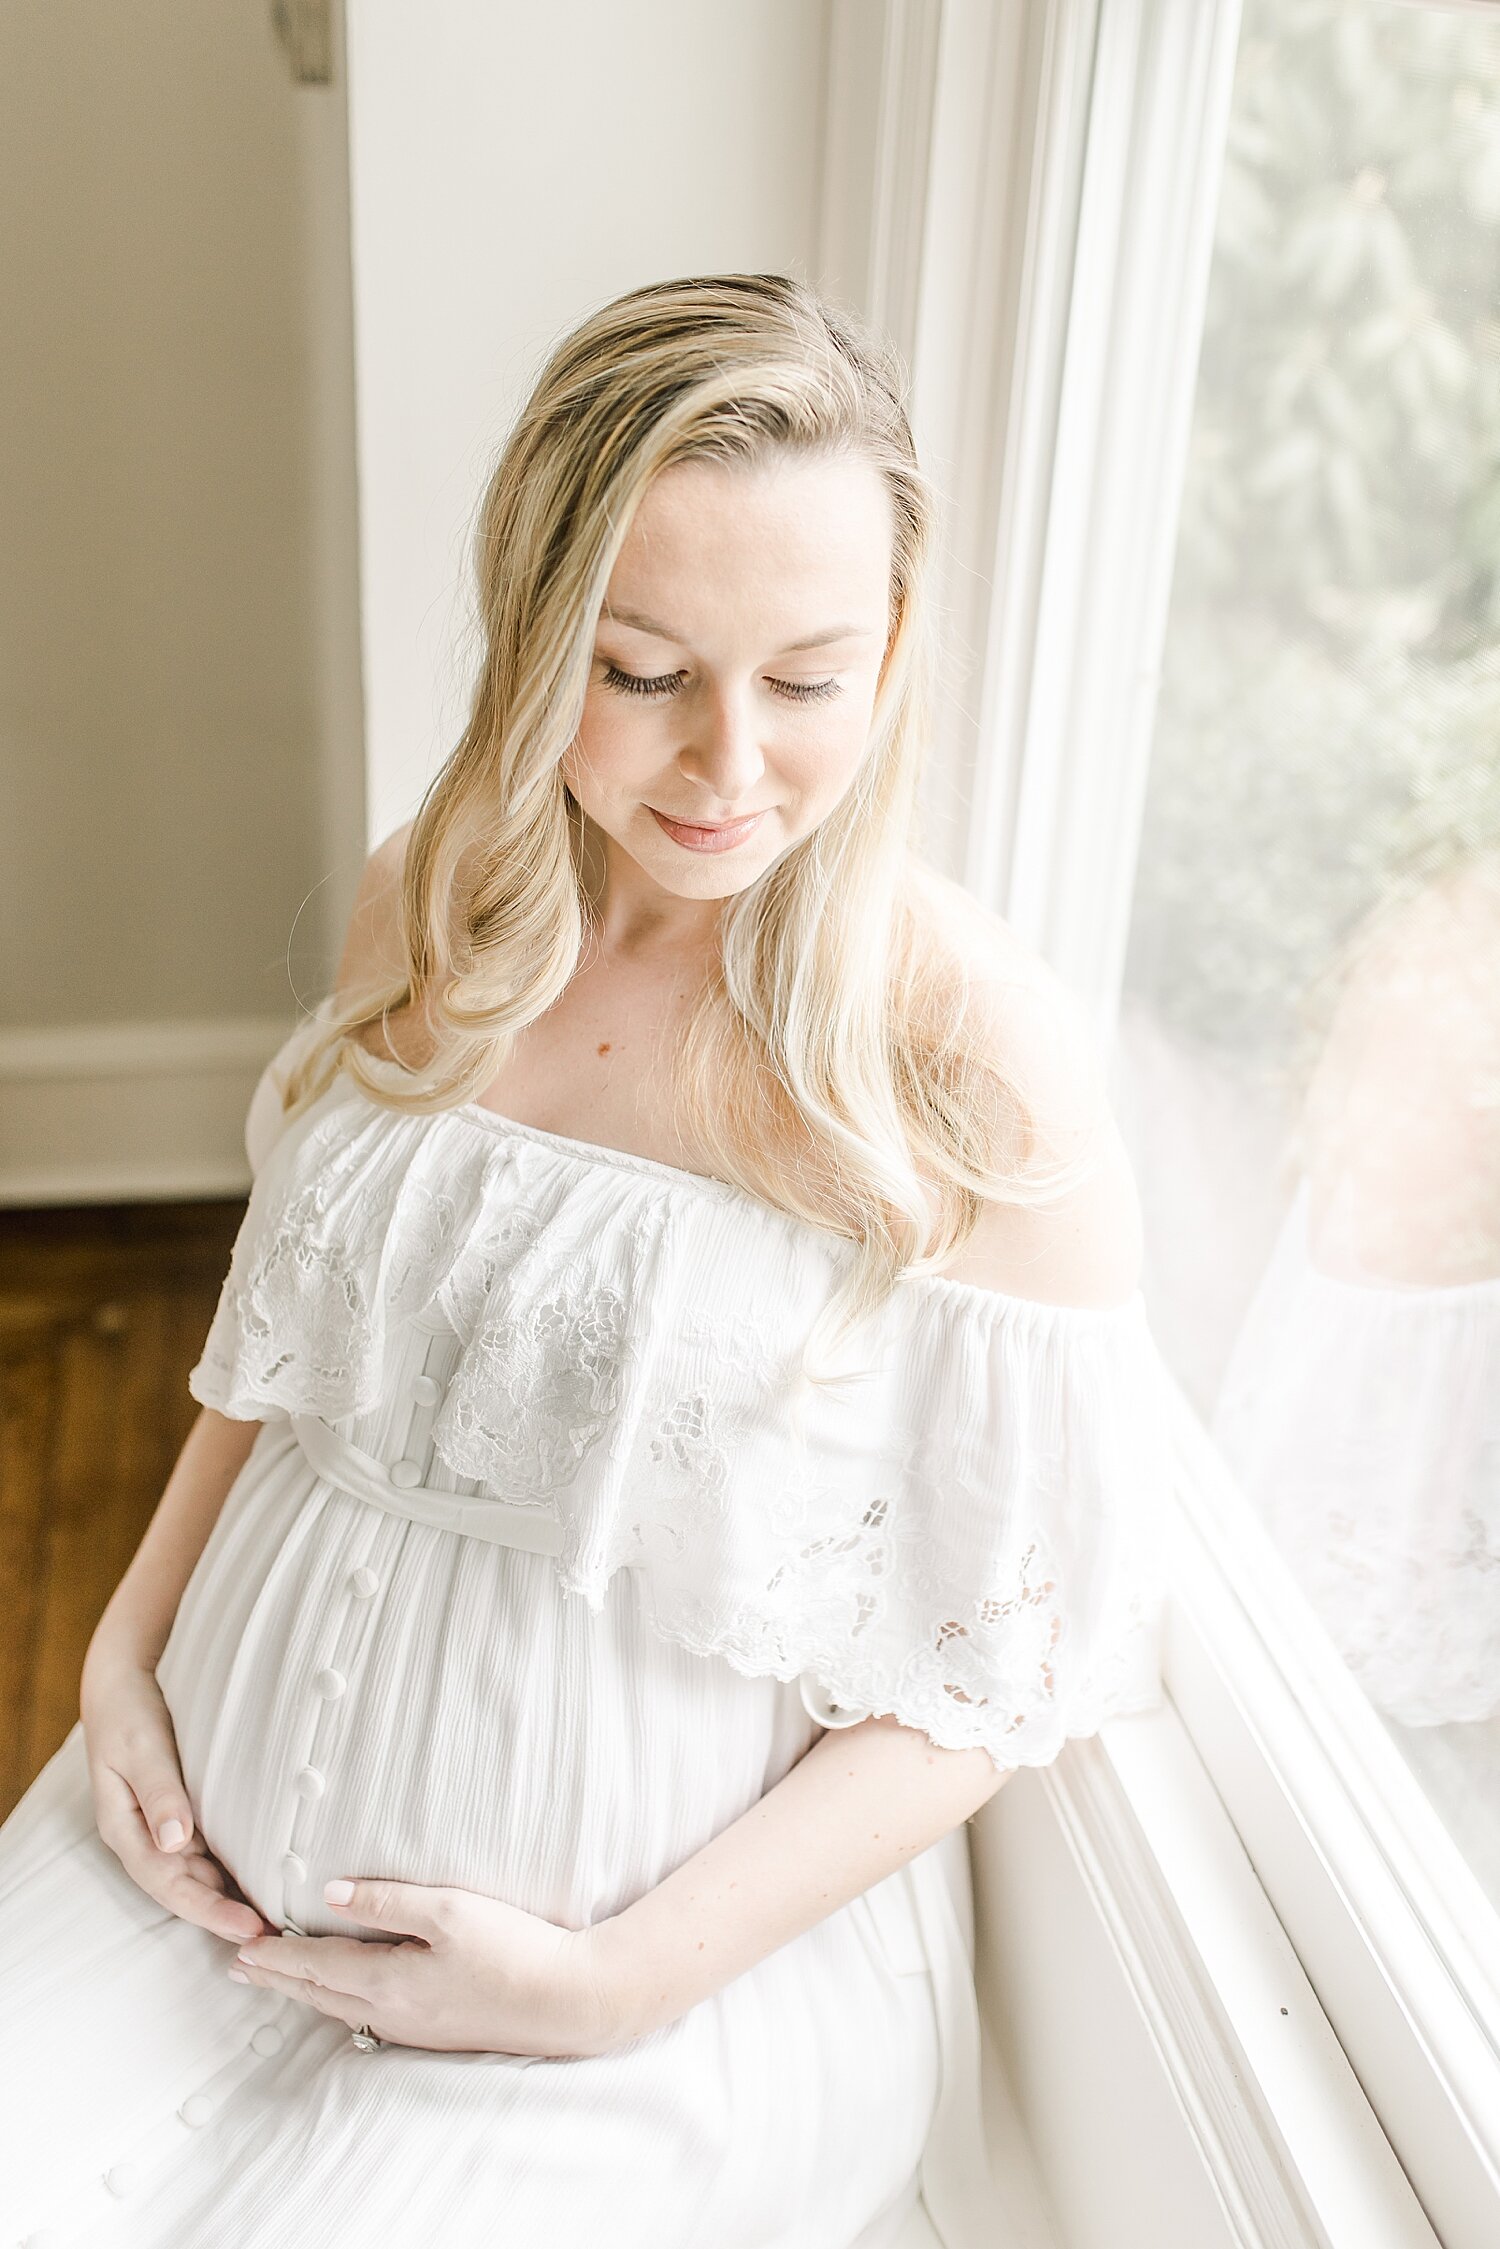 Pregnant mom wearing fillyboo maternity dress sitting in window seat. Photo by Kristin Wood Photography.